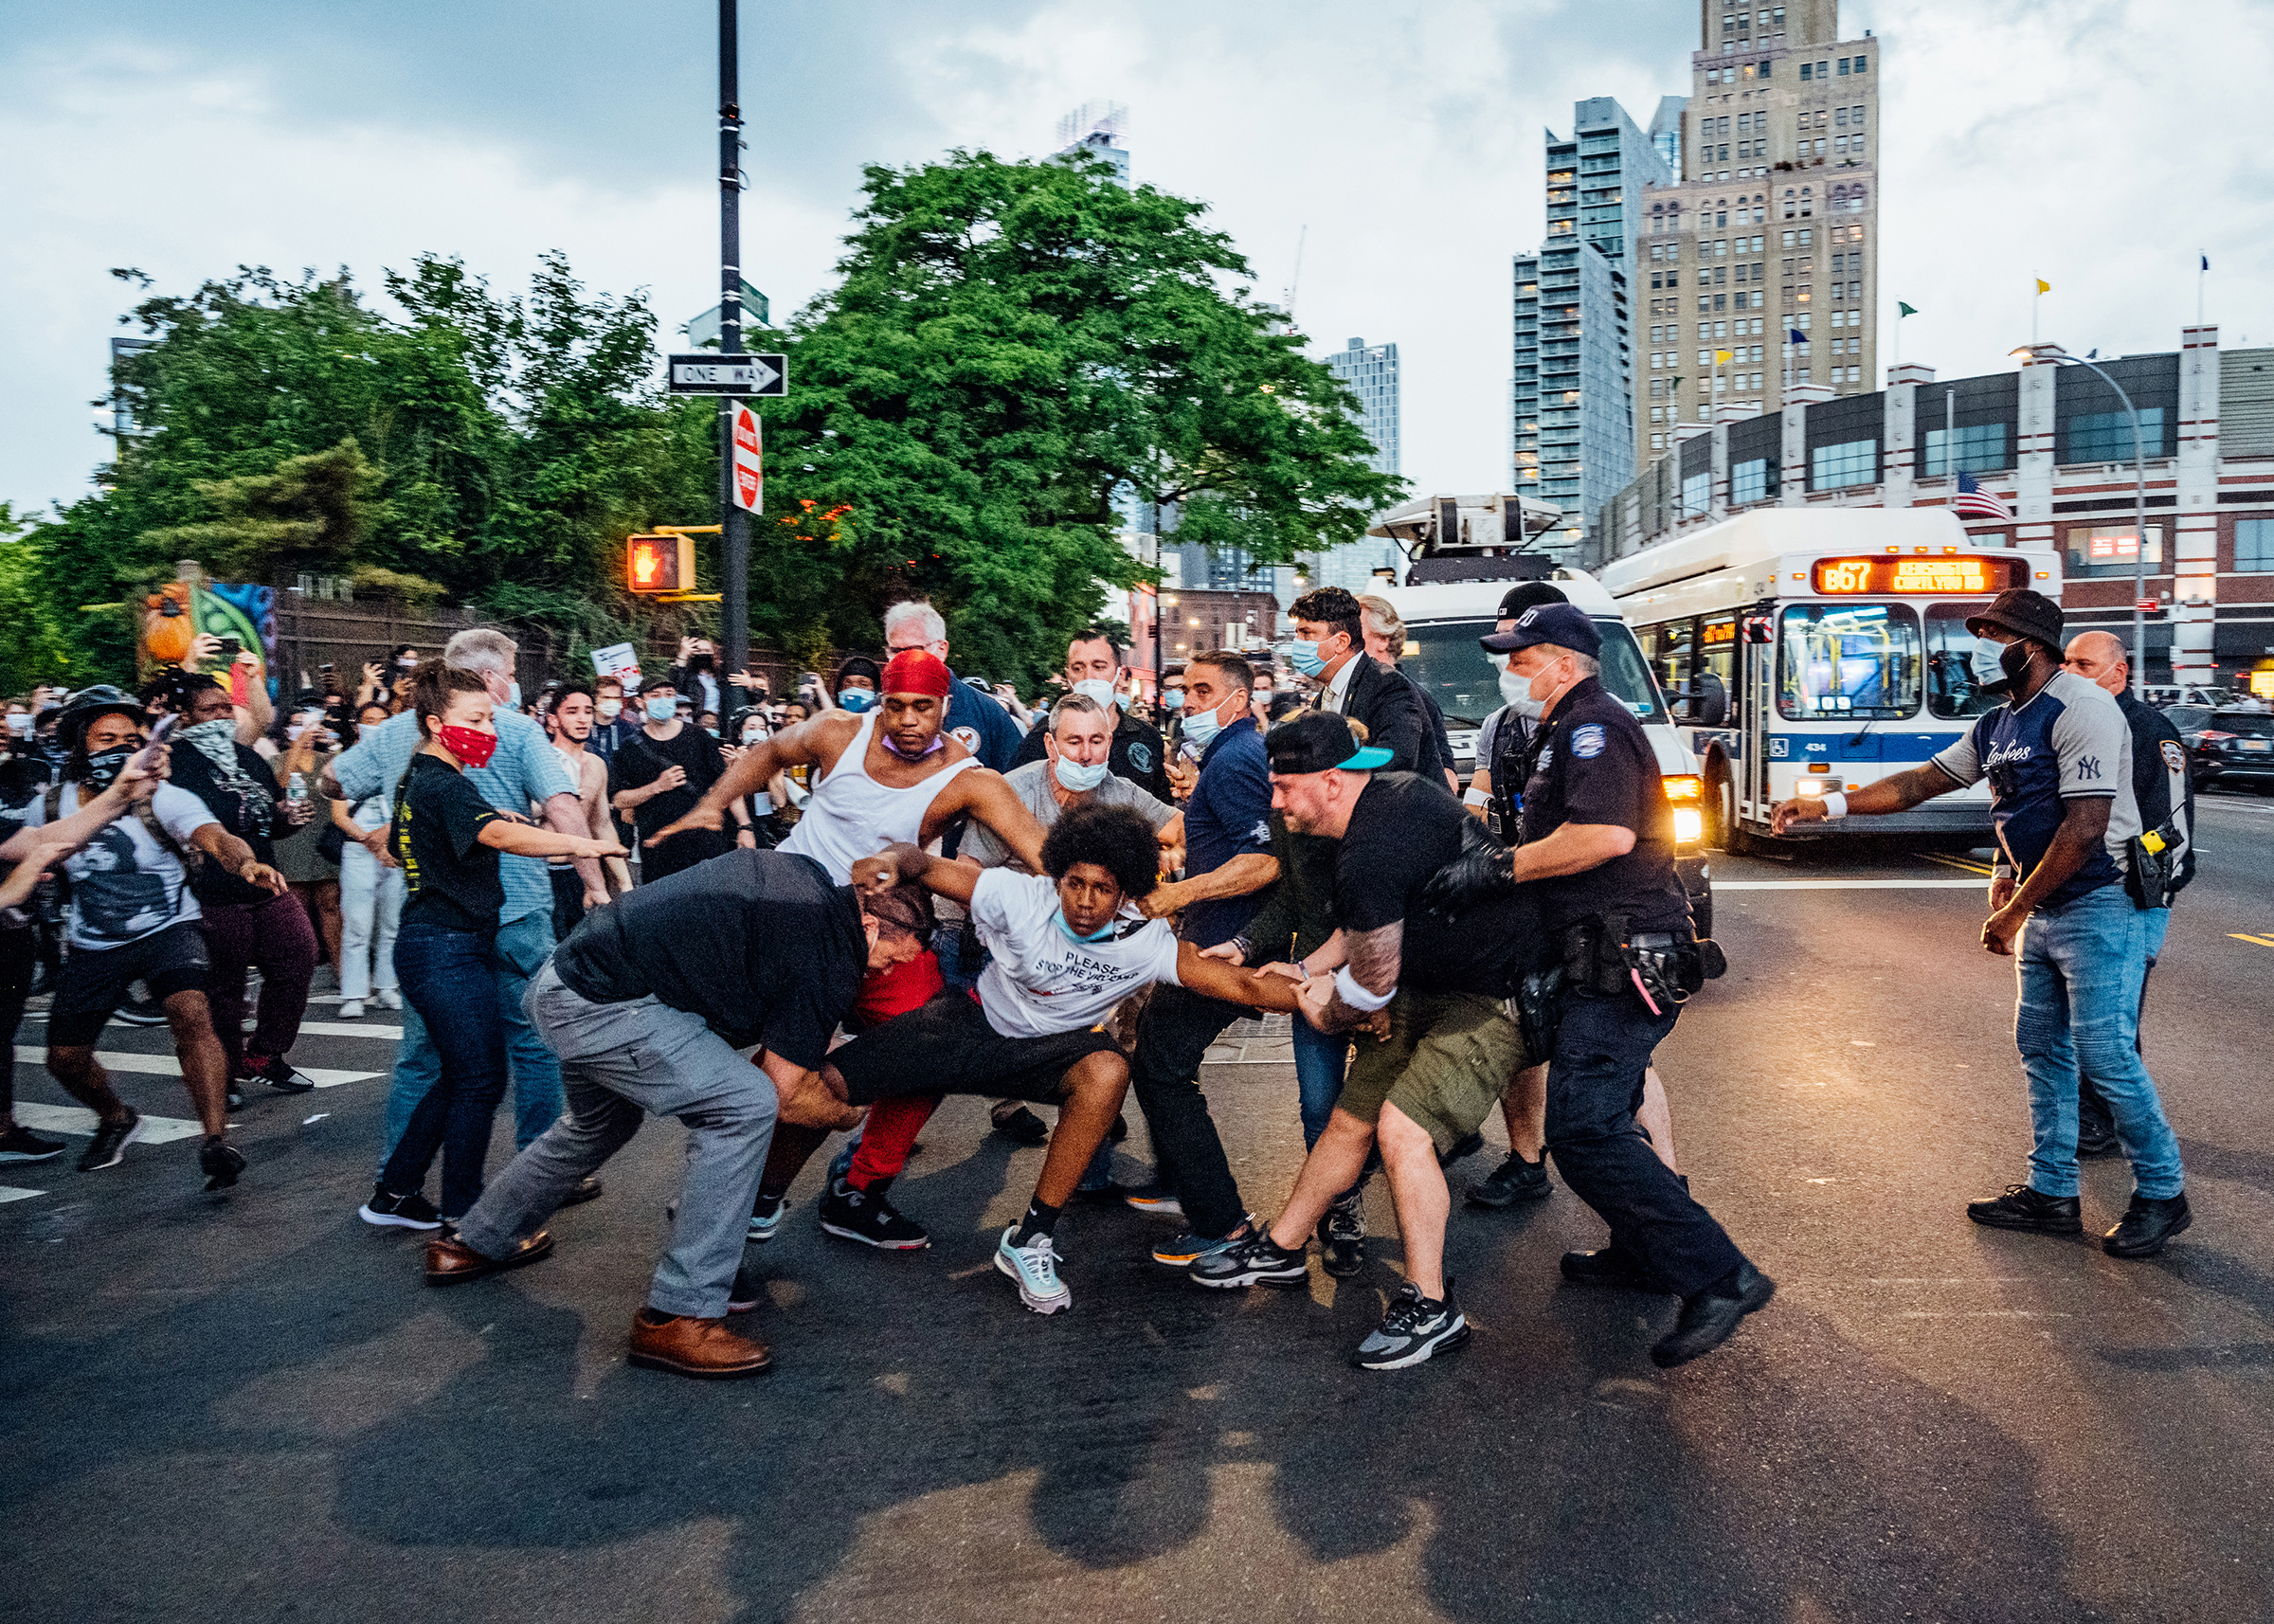 A protester, wearing a shirt that reads "Please Stop the Violence," is dragged near Brooklyn's Barclays Center on May 29, four days after George Floyd's killing.